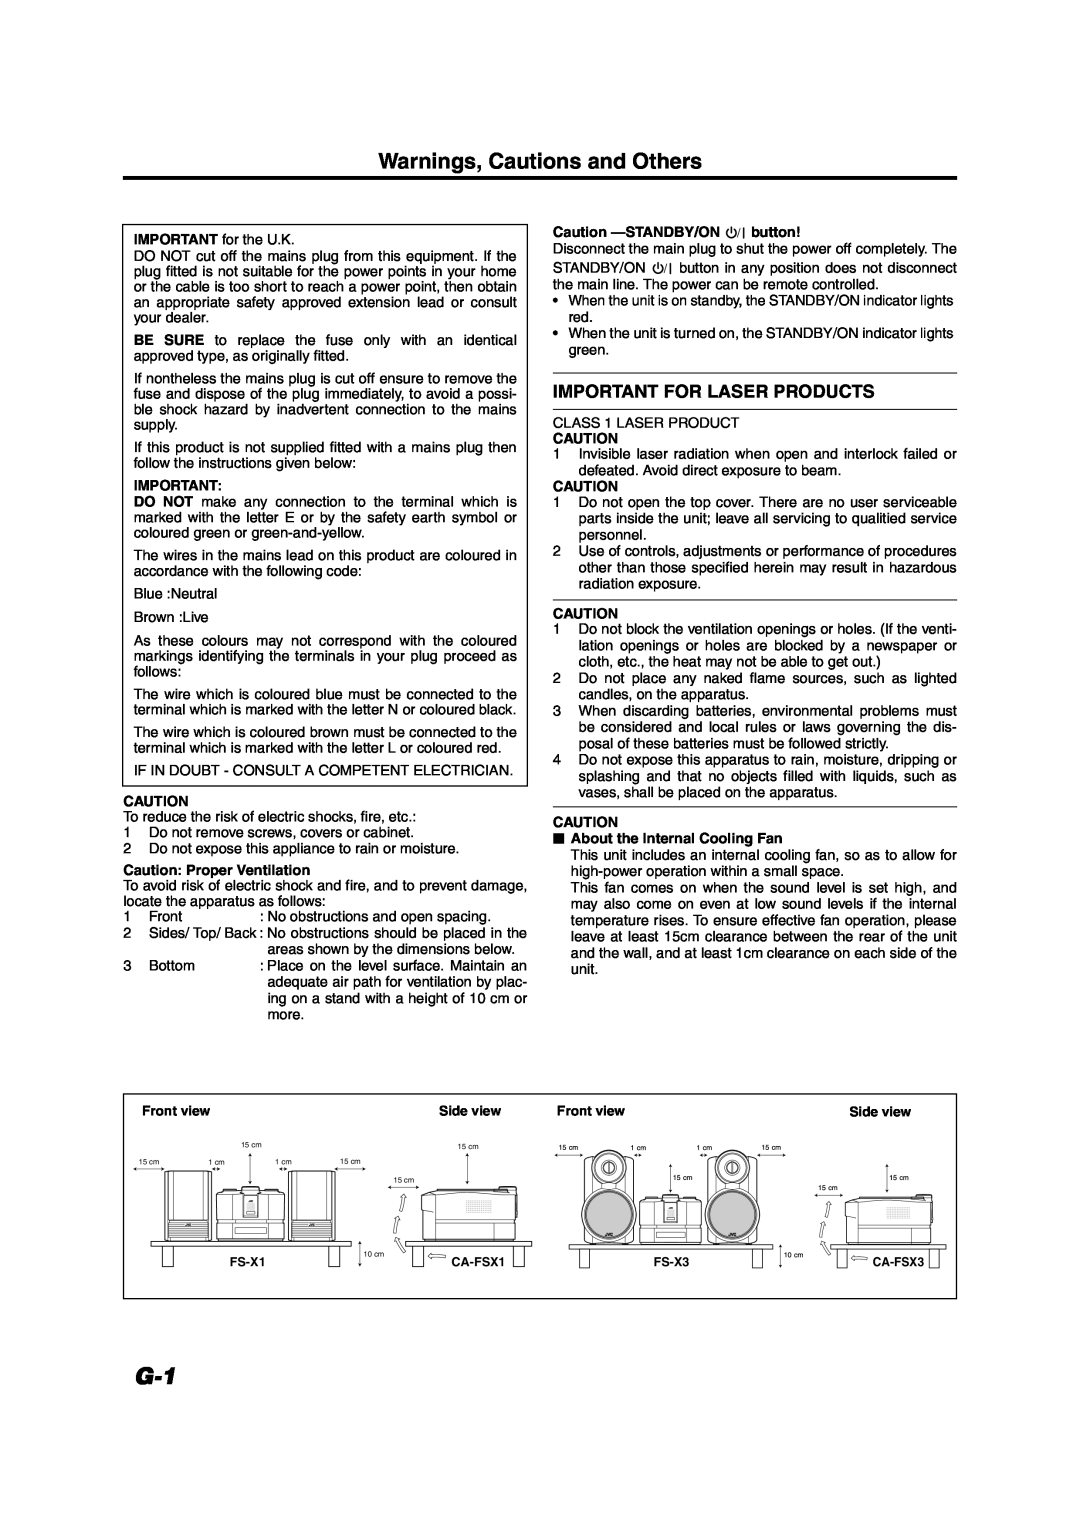 JVC LVT1040-003A manual Warnings, Cautions and Others, Important For Laser Products, Caution Proper Ventilation 